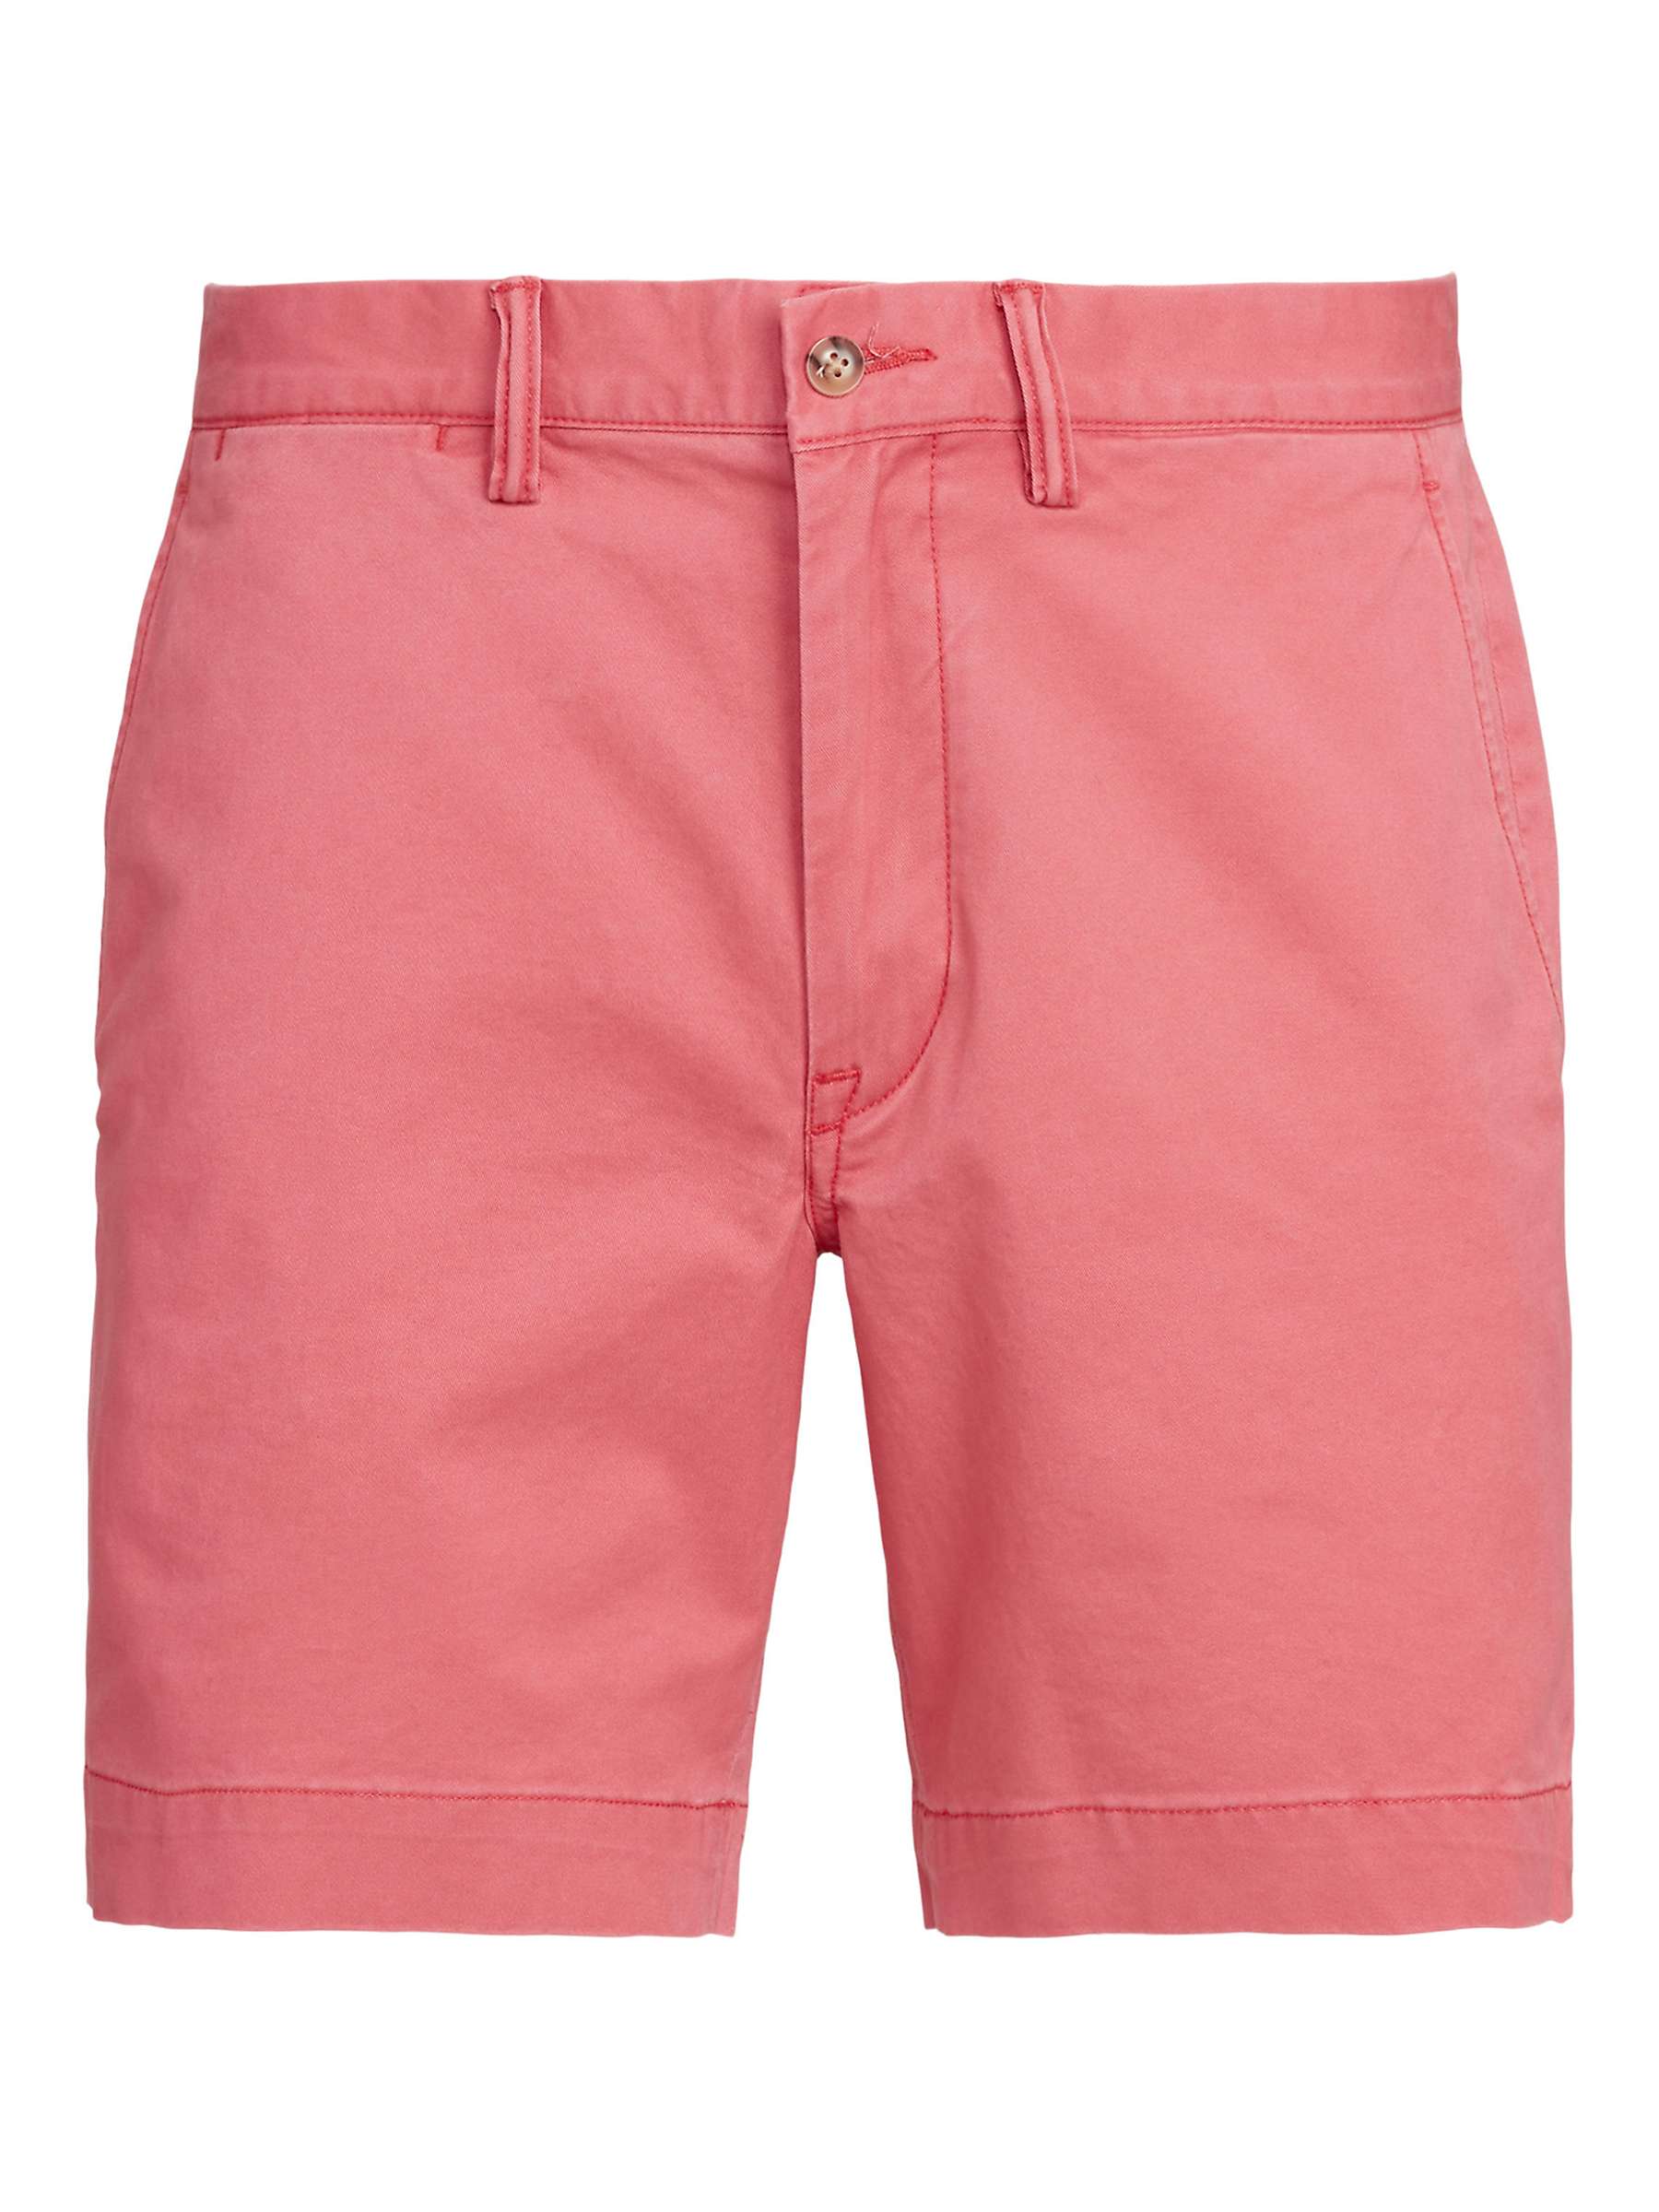 Buy Ralph Lauren Stretch Straight Fit Chino Shorts Online at johnlewis.com